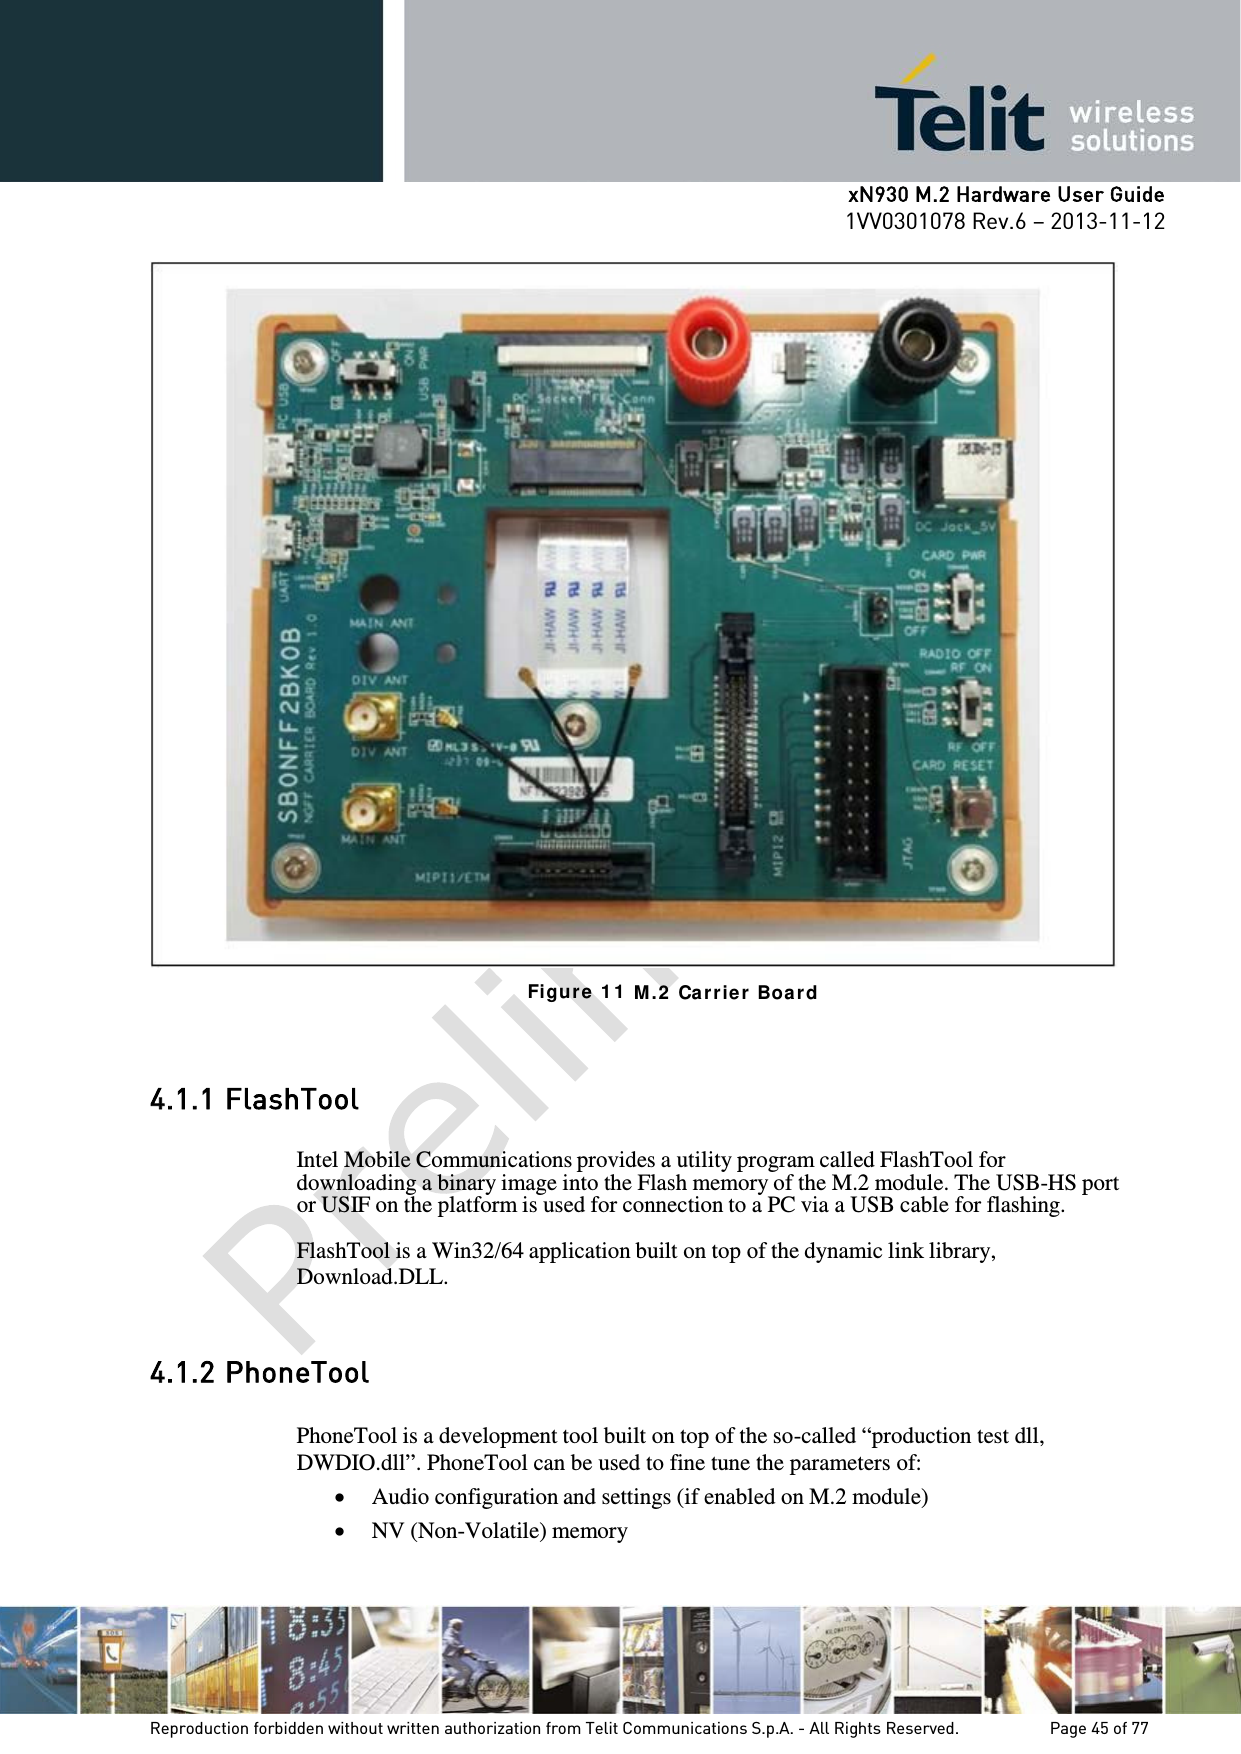      xN930 M.2 Hardware User Guide 1VV0301078 Rev.6 – 2013-11-12     Figur e 1 1  M . 2  Ca r rier  Board  4.1.1 FlashTool  Intel Mobile Communications provides a utility program called FlashTool for downloading a binary image into the Flash memory of the M.2 module. The USB-HS port or USIF on the platform is used for connection to a PC via a USB cable for flashing.  FlashTool is a Win32/64 application built on top of the dynamic link library, Download.DLL.   4.1.2 PhoneTool  PhoneTool is a development tool built on top of the so-called “production test dll, DWDIO.dll”. PhoneTool can be used to fine tune the parameters of: • Audio configuration and settings (if enabled on M.2 module) • NV (Non-Volatile) memory   Reproduction forbidden without written authorization from Telit Communications S.p.A. - All Rights Reserved.    Page 45 of 77 